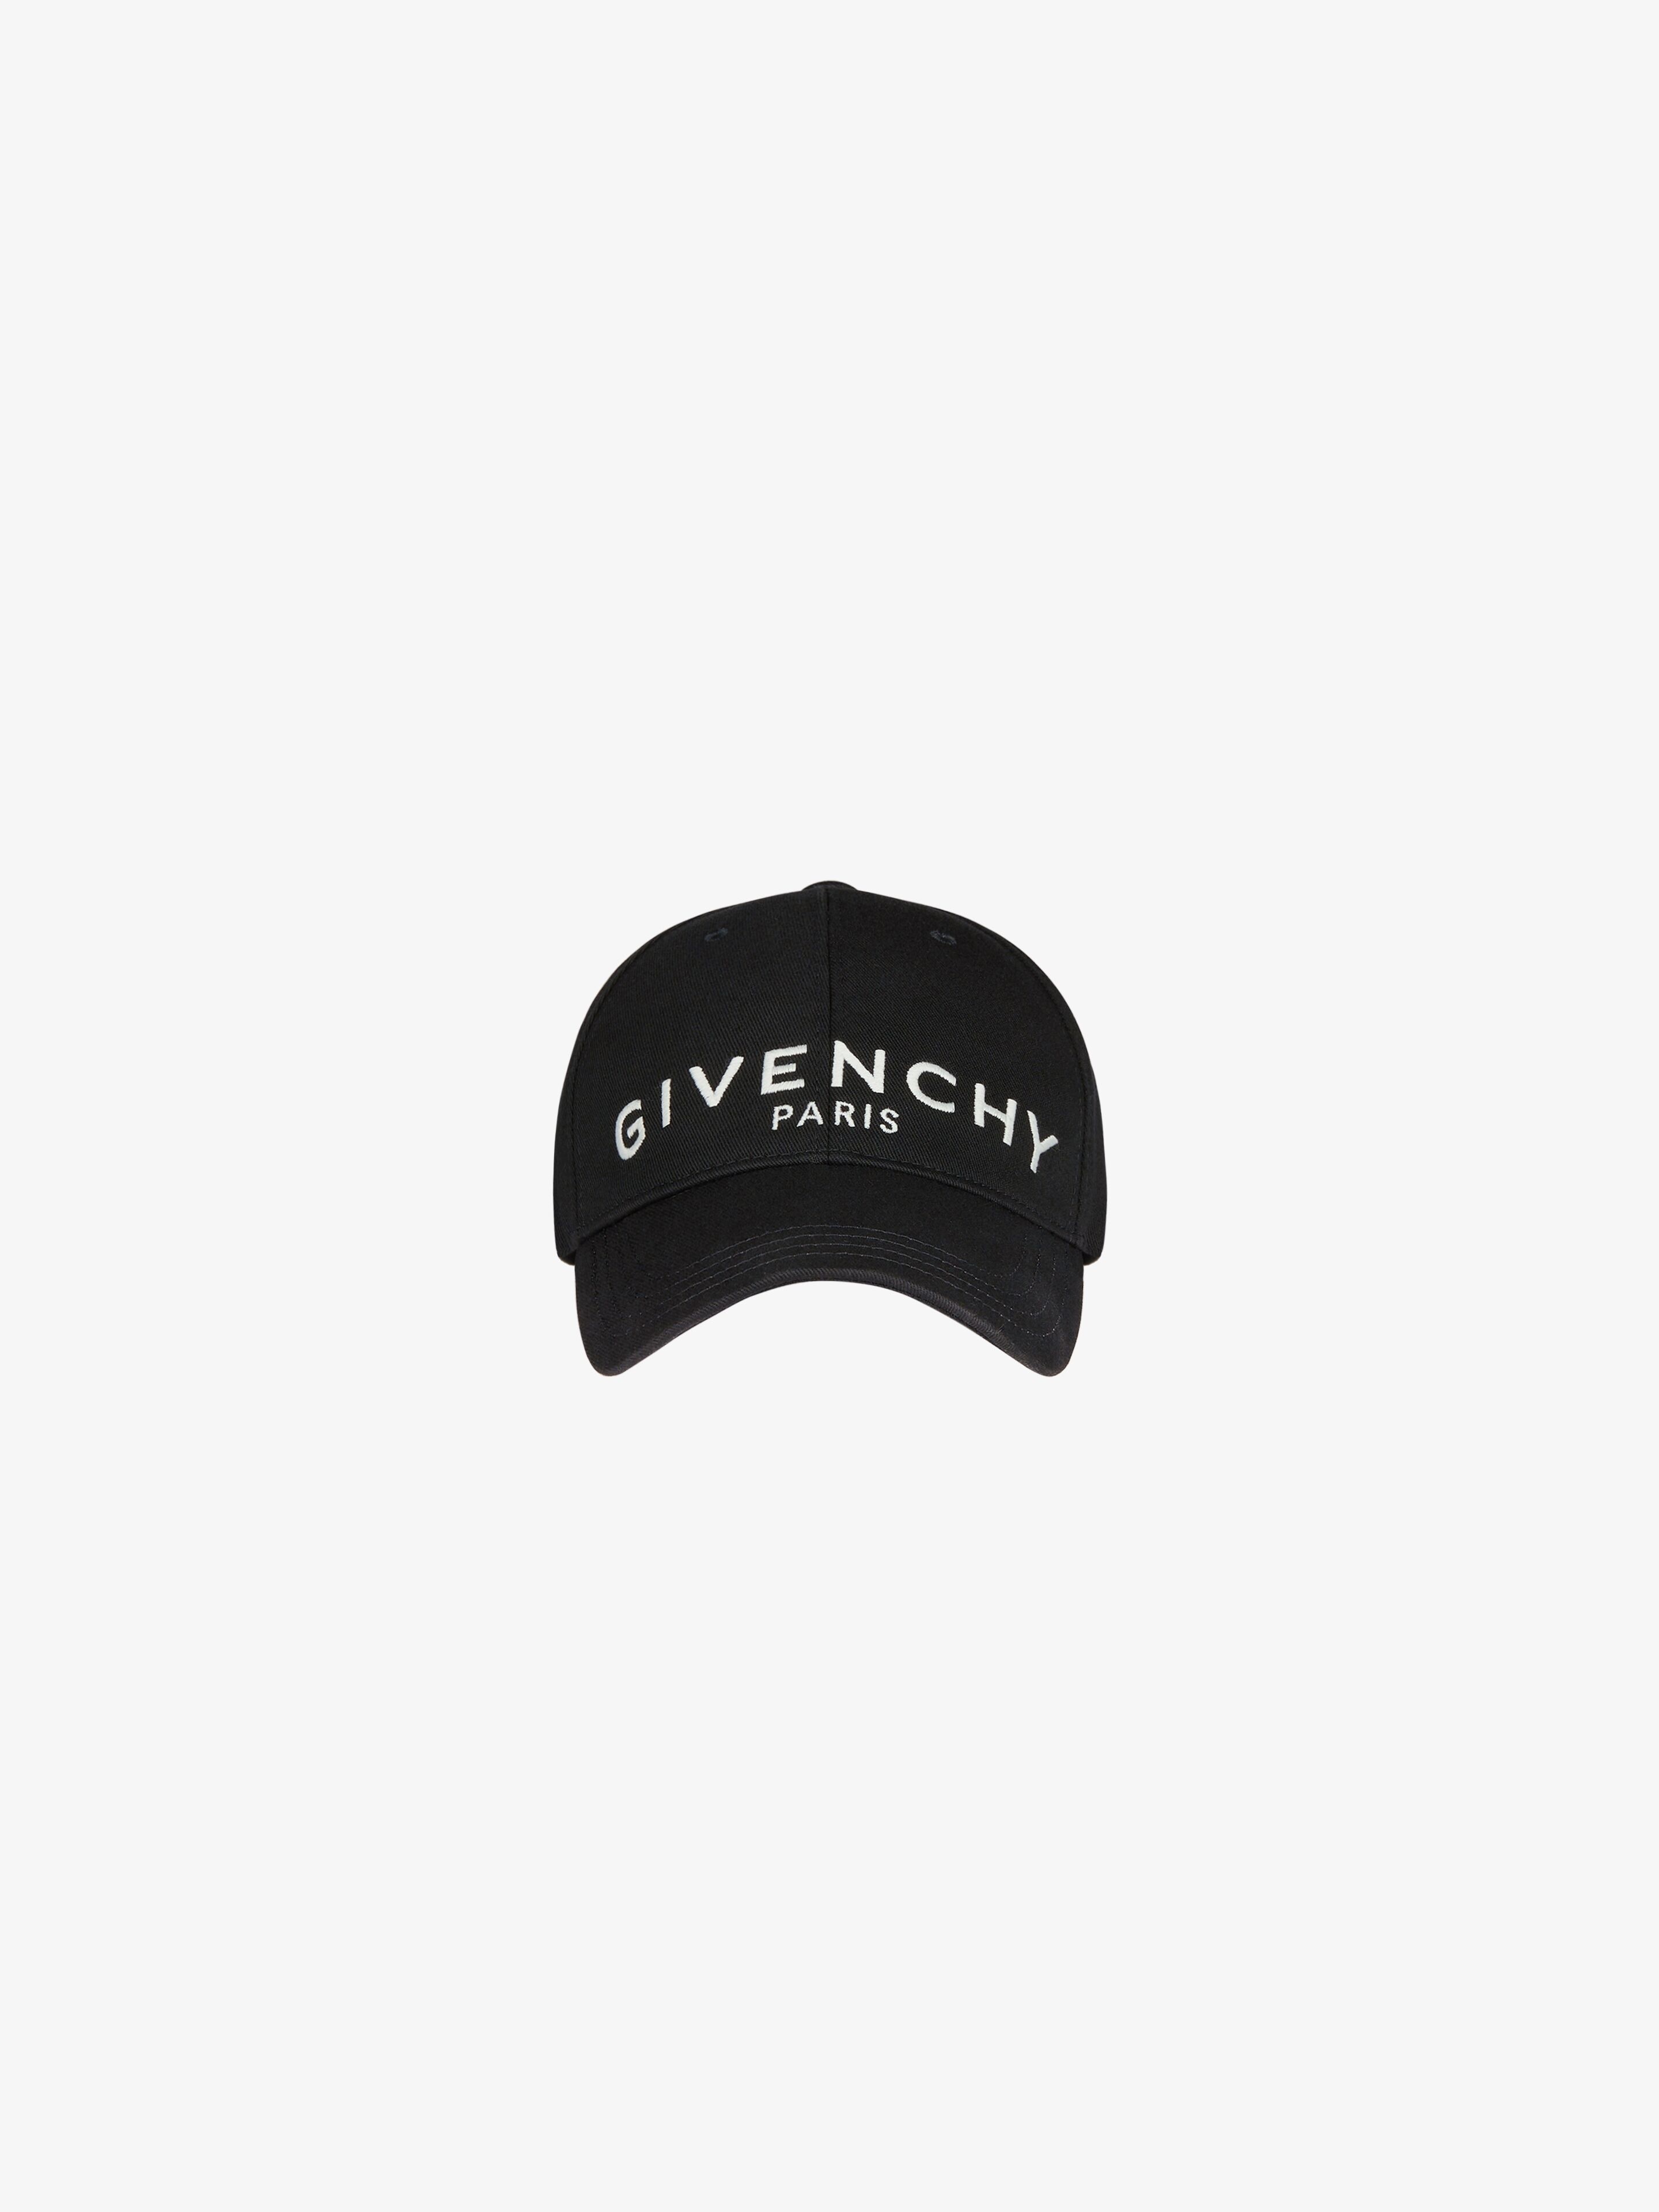 GIVENCHY Paris embroidered cap - black